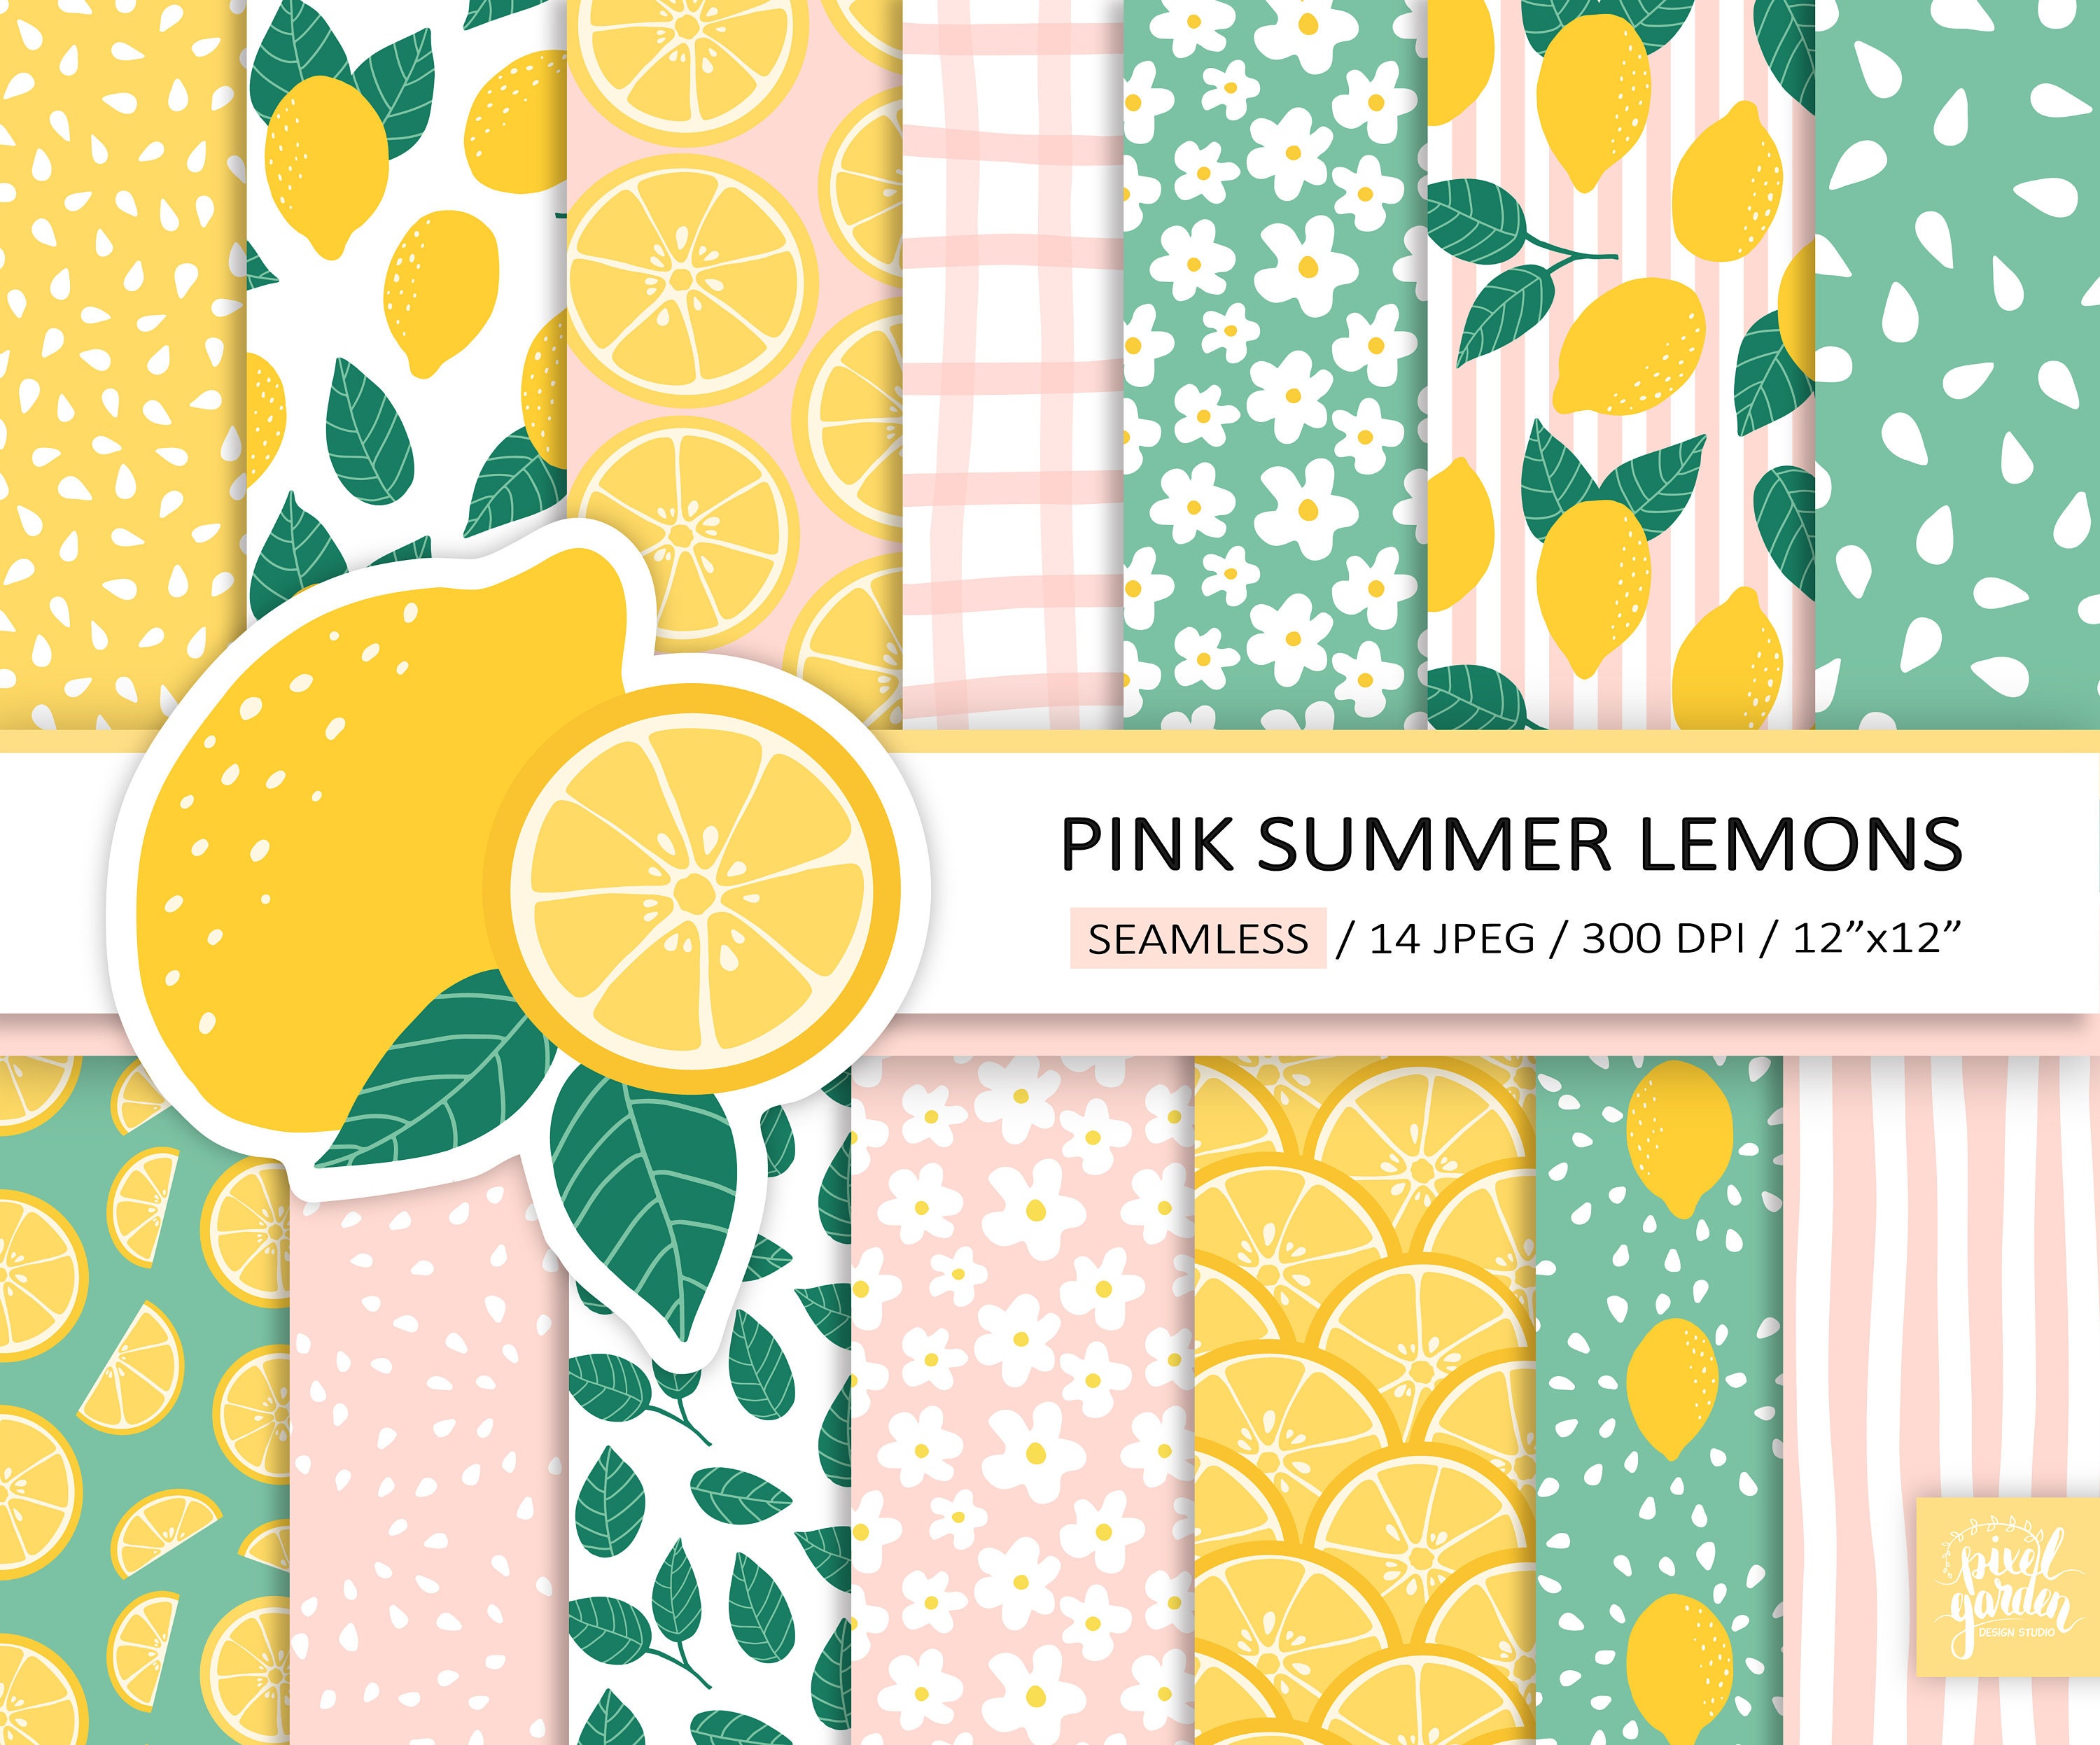 Summer Fresh Lemon Seamless Pattern Graphic by thanaporn.pinp